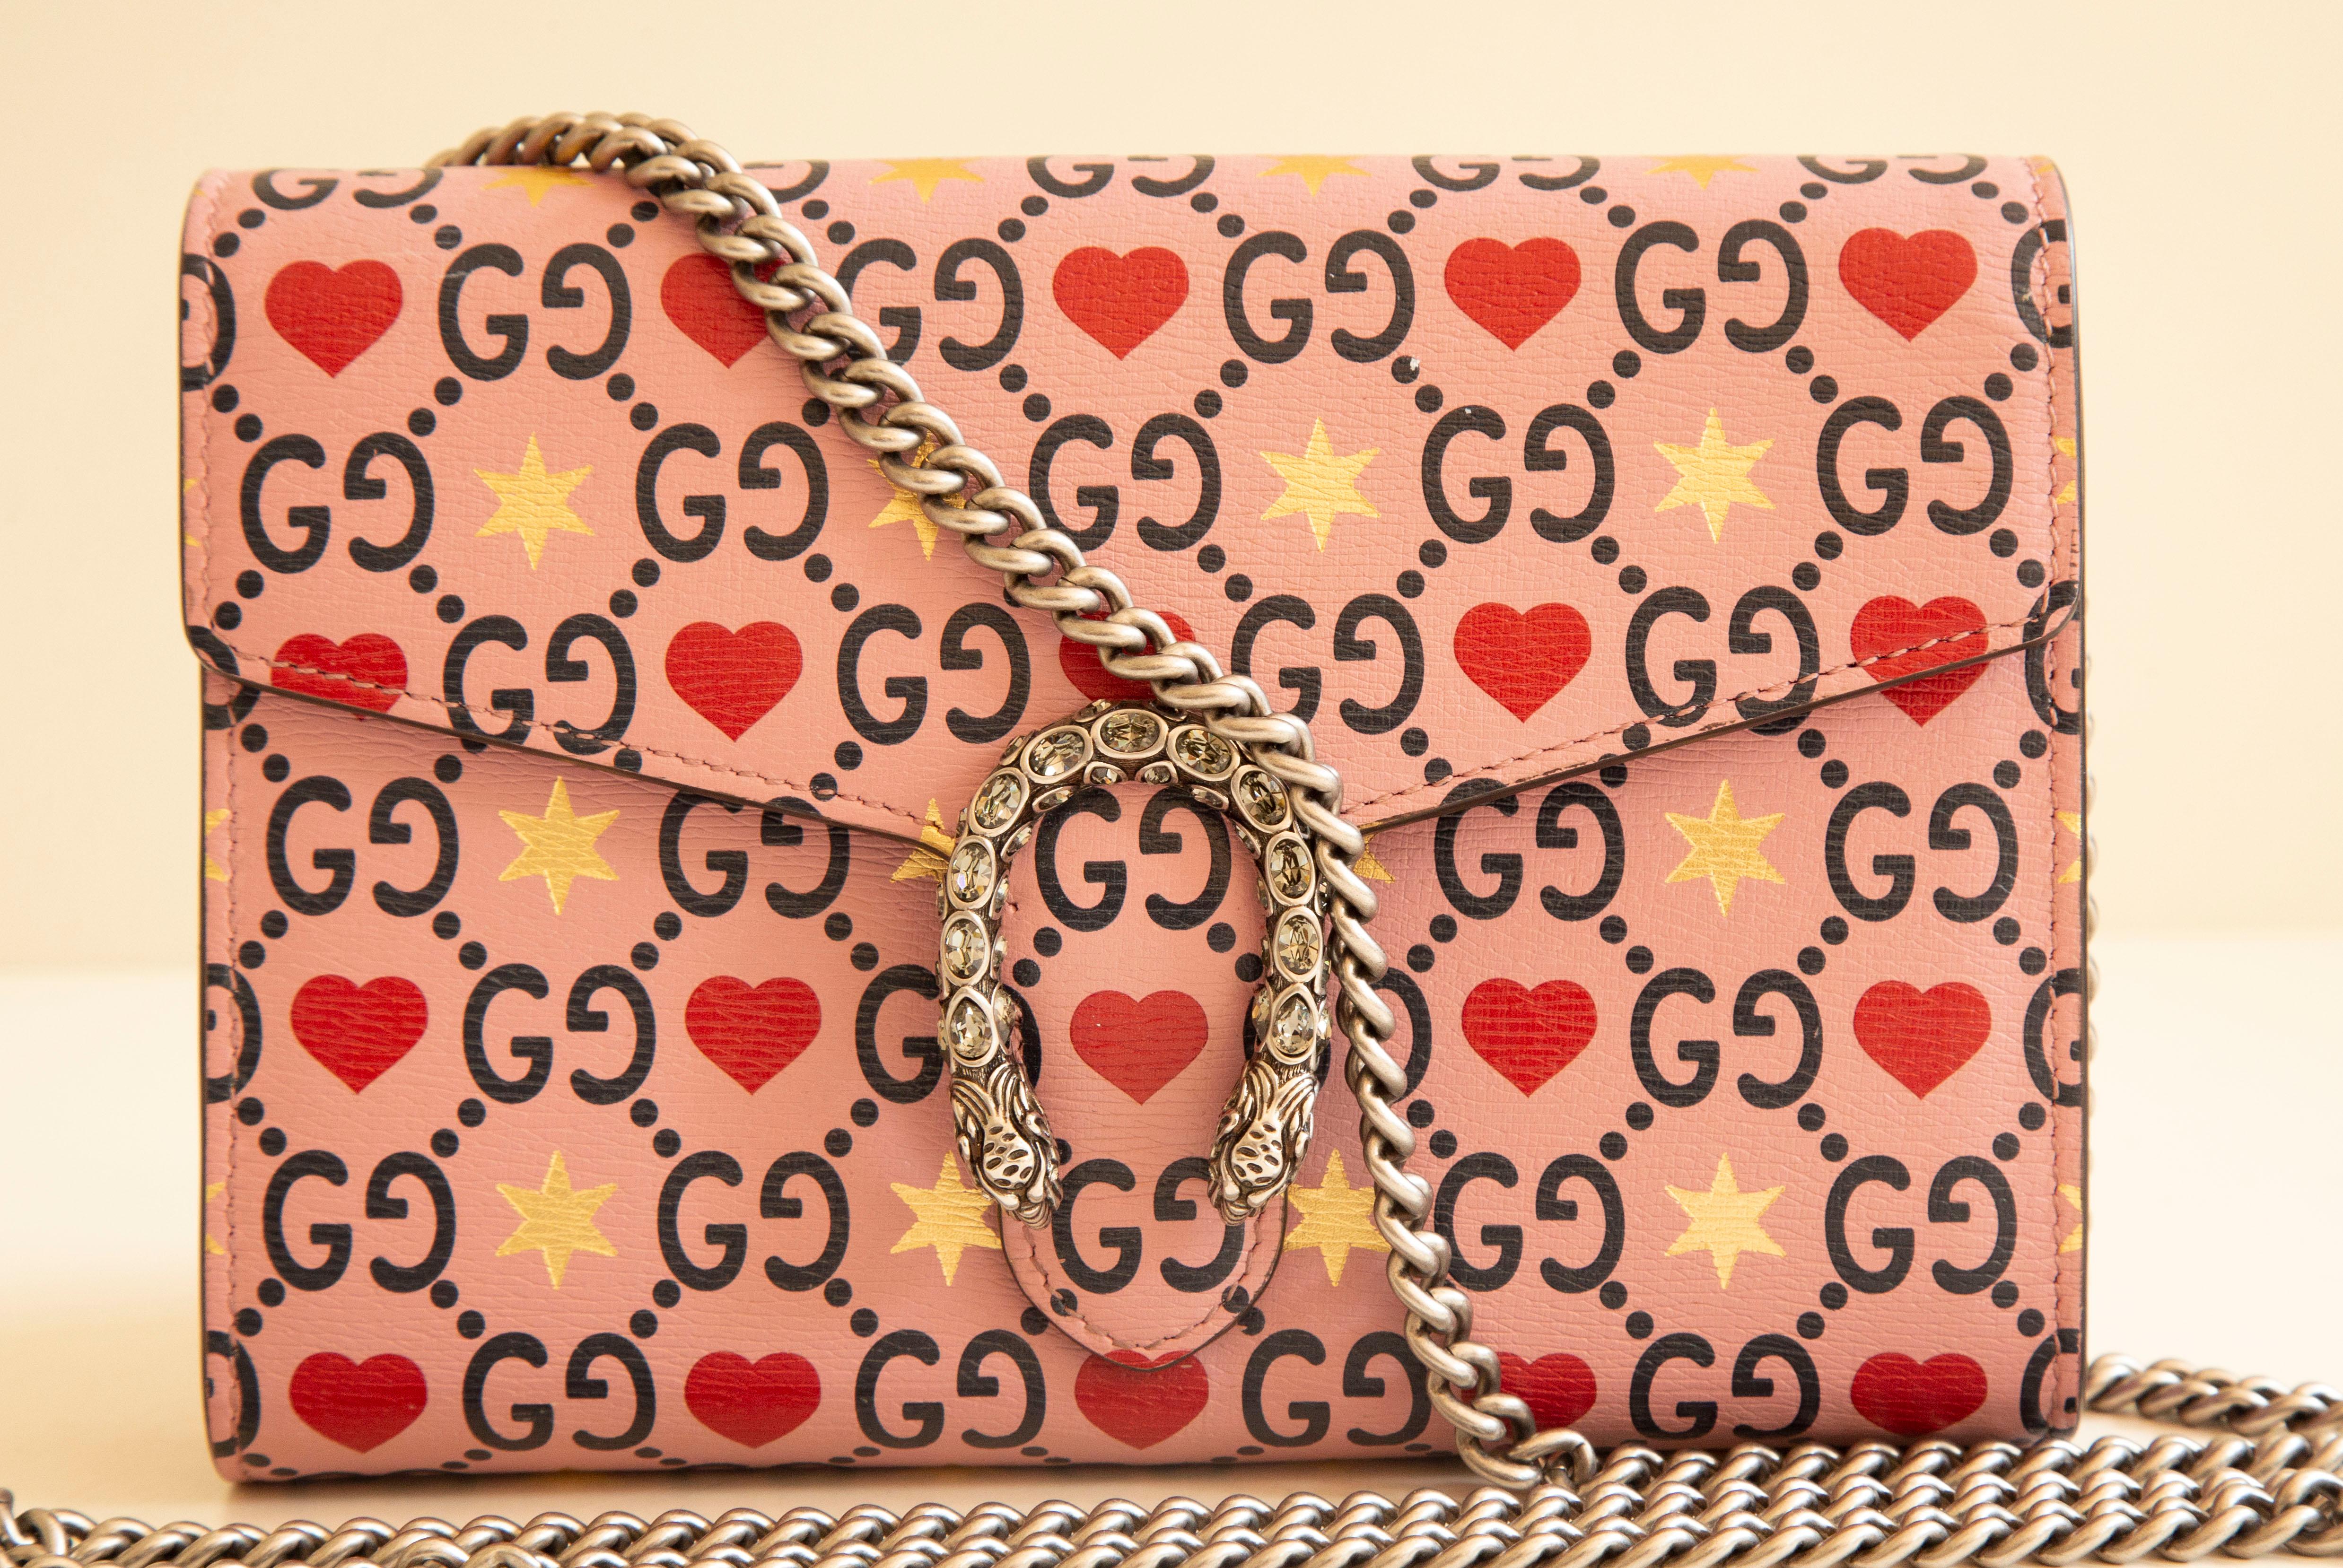 Gucci Dionizus wallet on chain/cross body bag/shoulder bag in limited edition Valentine's Day. The bag is made of embossed calfskin with the GG web on a pink background with heart and star decoration. The bag features silver tone chain strap (124